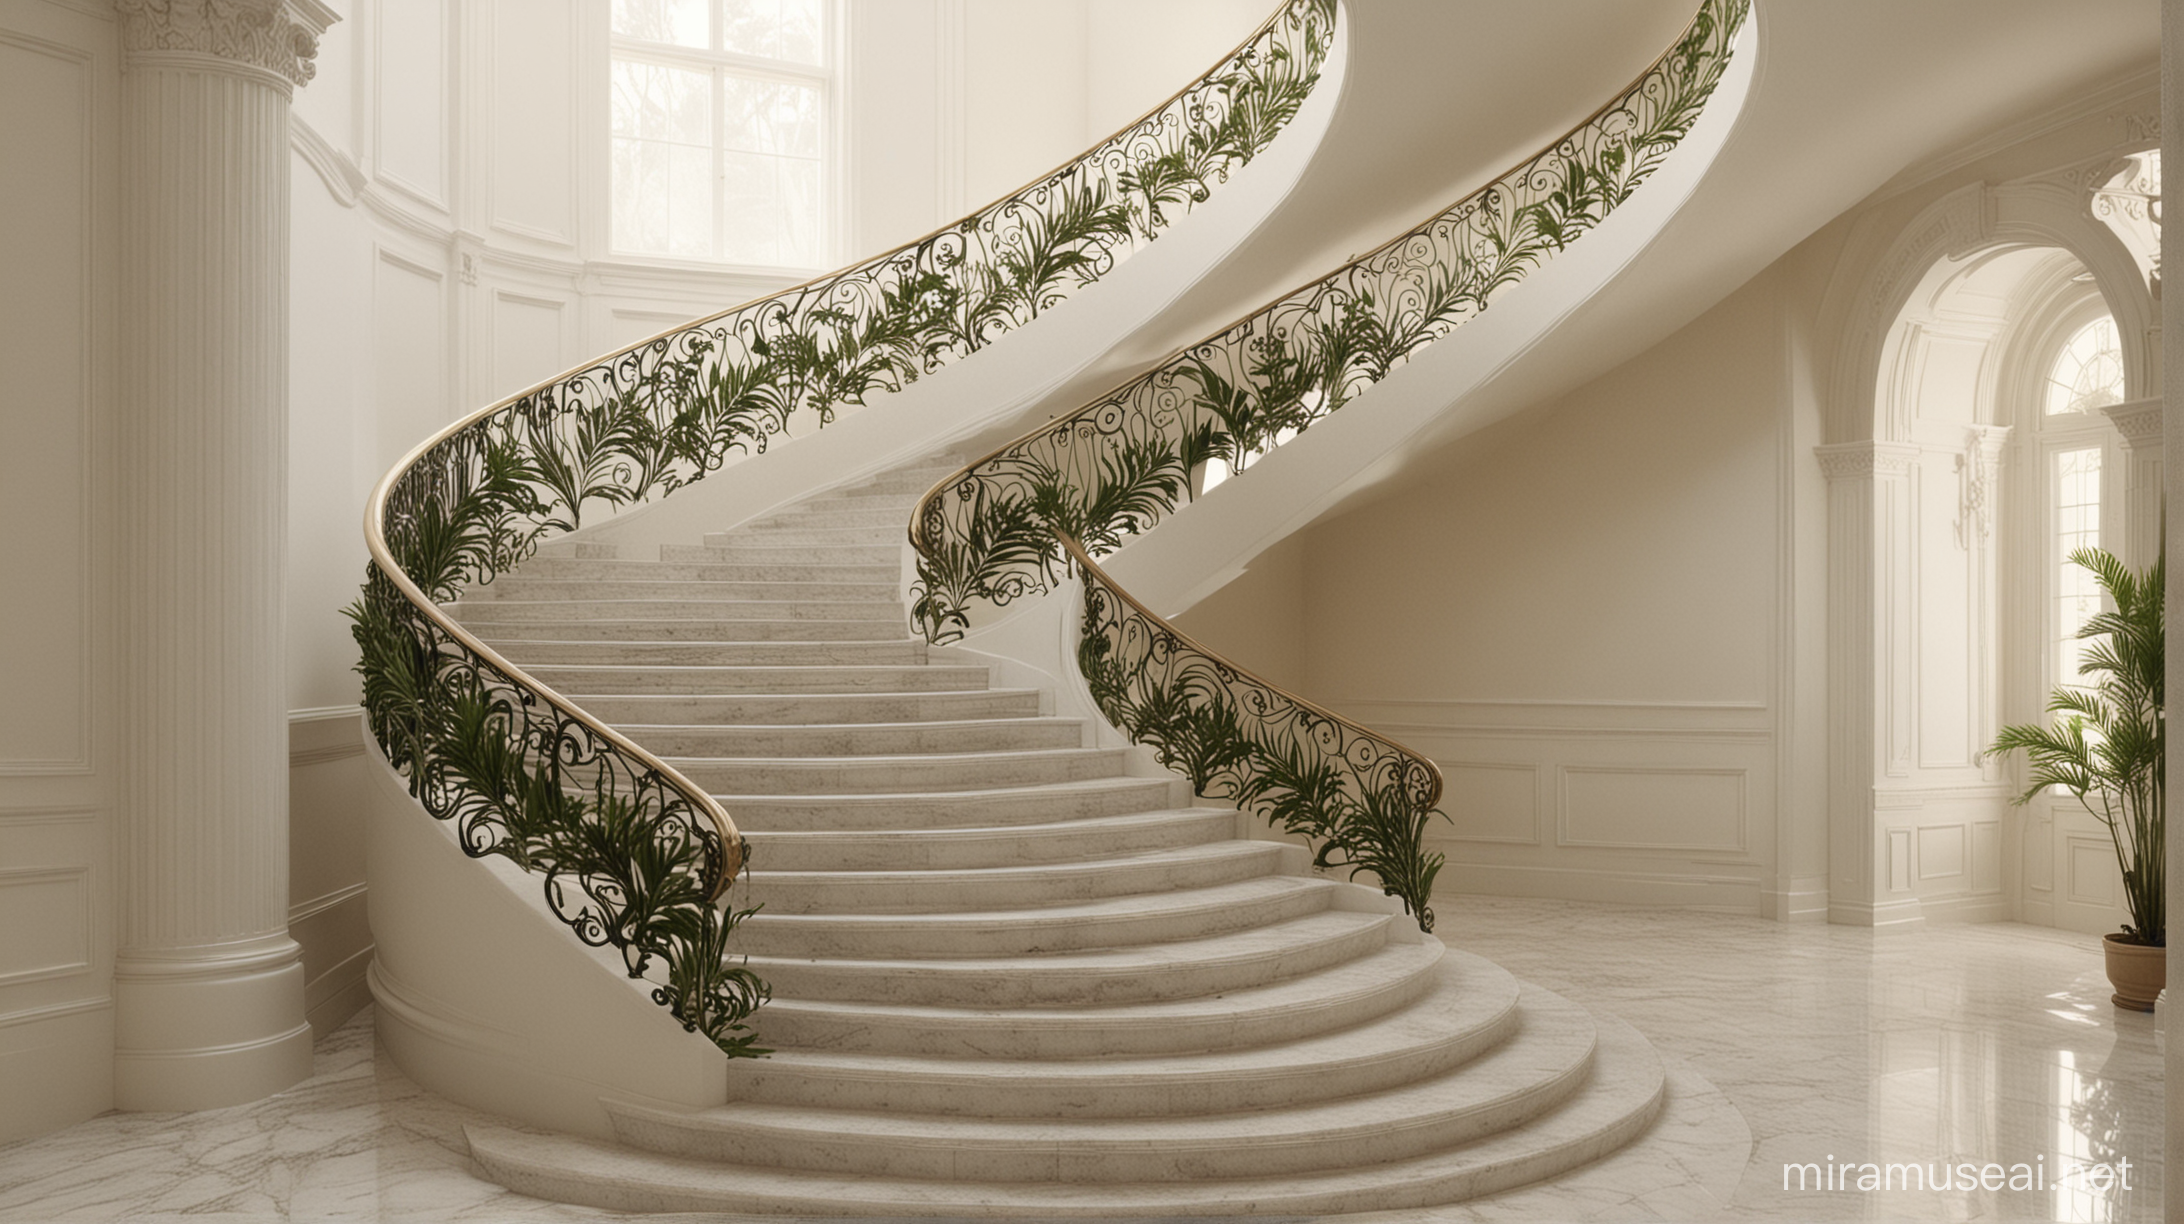 Slightly Curving grand staircase off center elegant cosmic plants no furniture heavenly ethereal 

